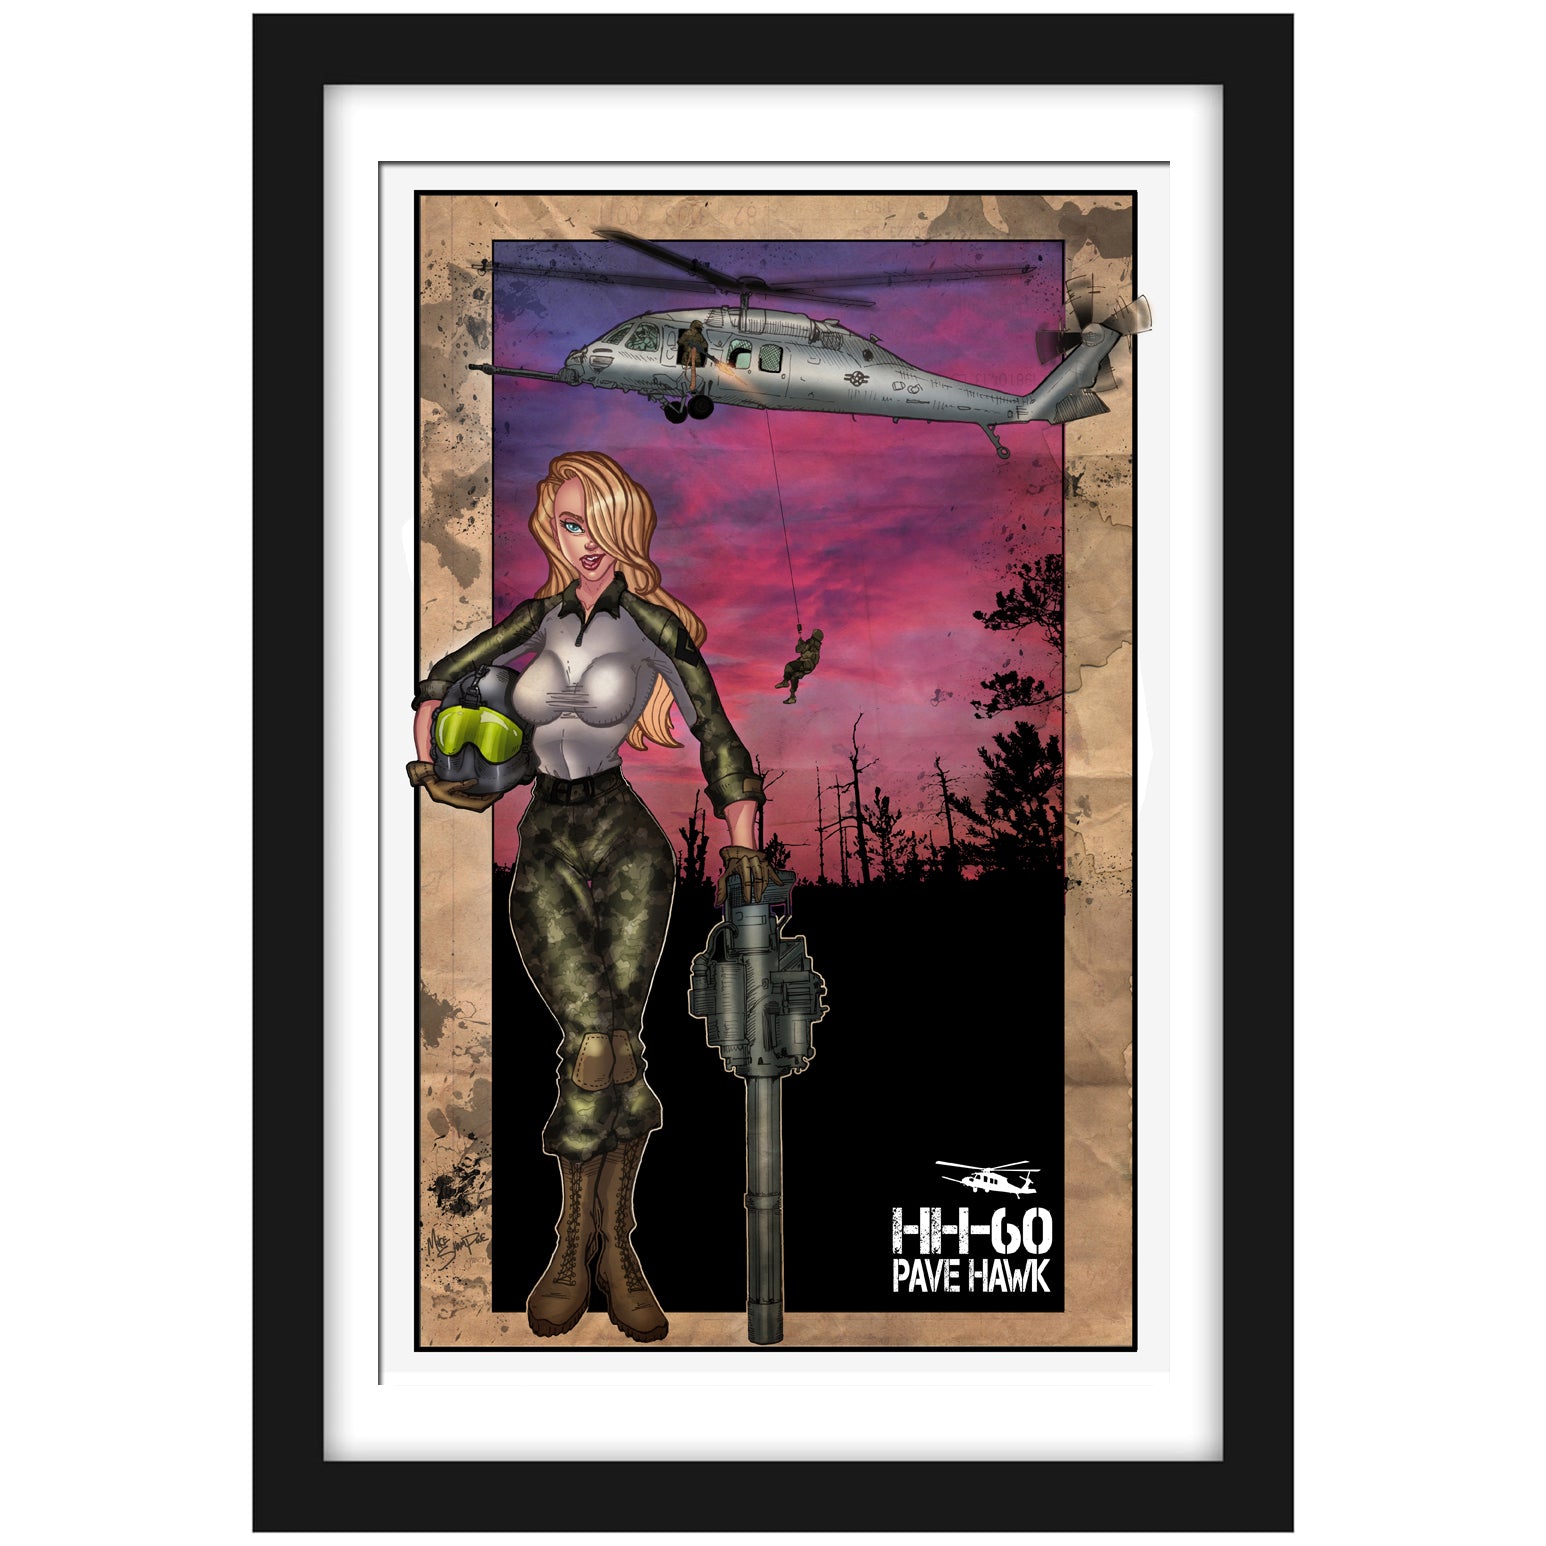 HH-60 "PAVE HAWK"- Vintage Print Pinup & Airplane Art by Mike Shampine - Signed and Numbered